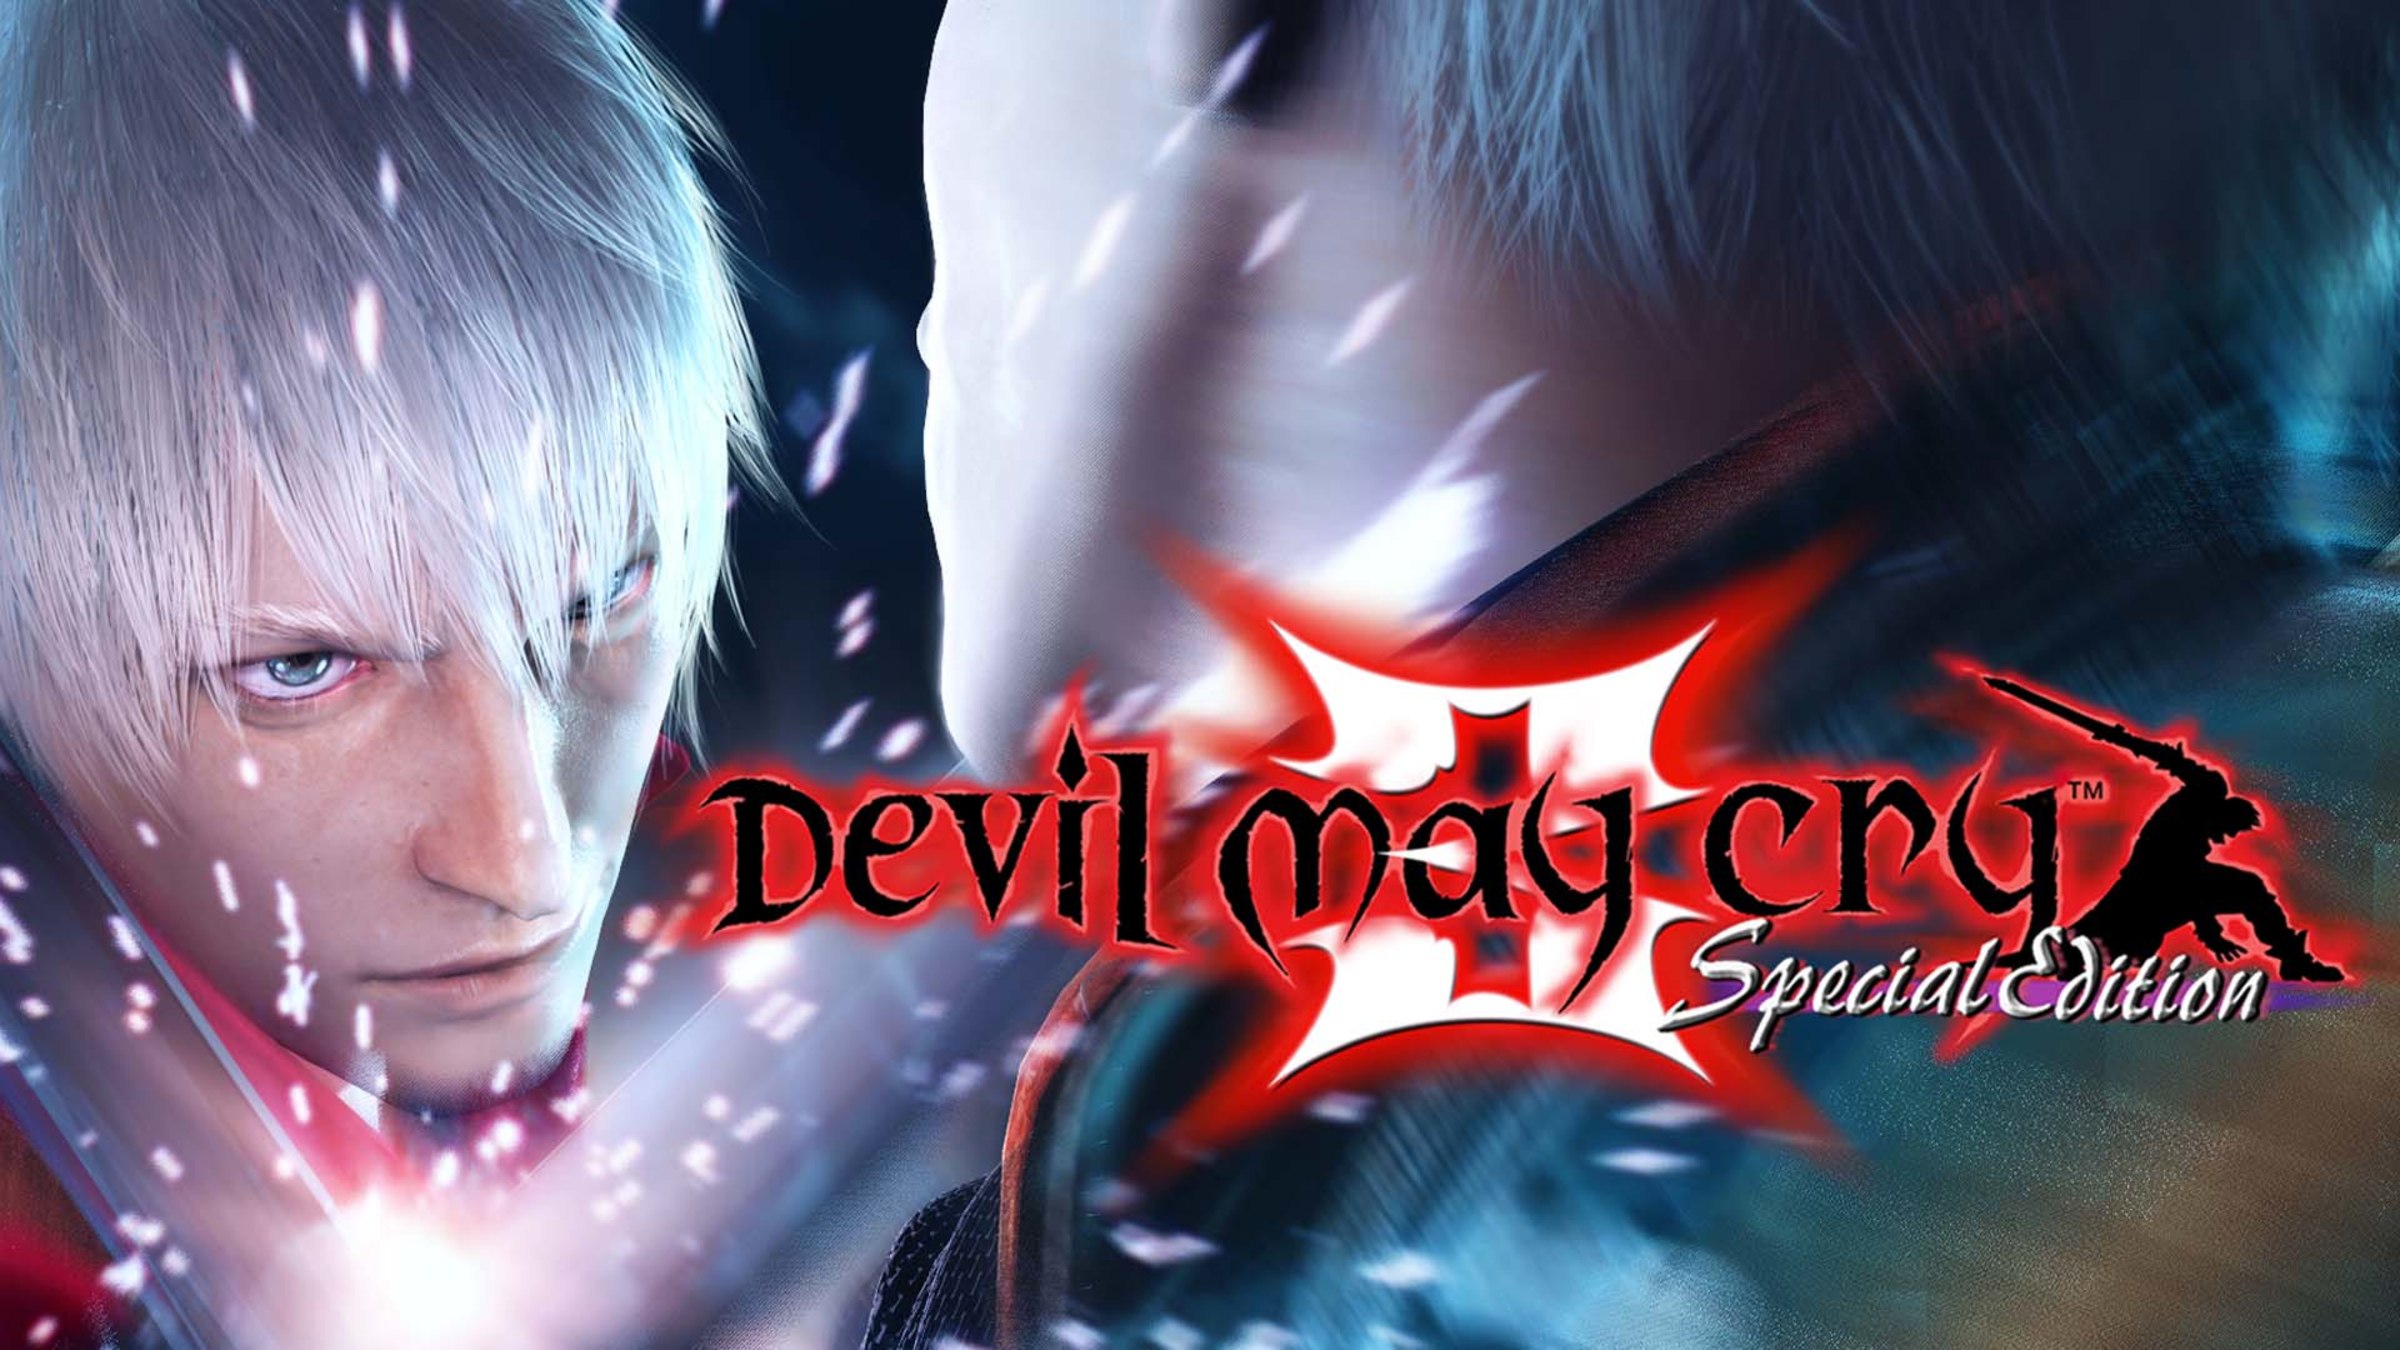 Devil May Cry 3 Special Edition for Nintendo Switch - Nintendo Official Site